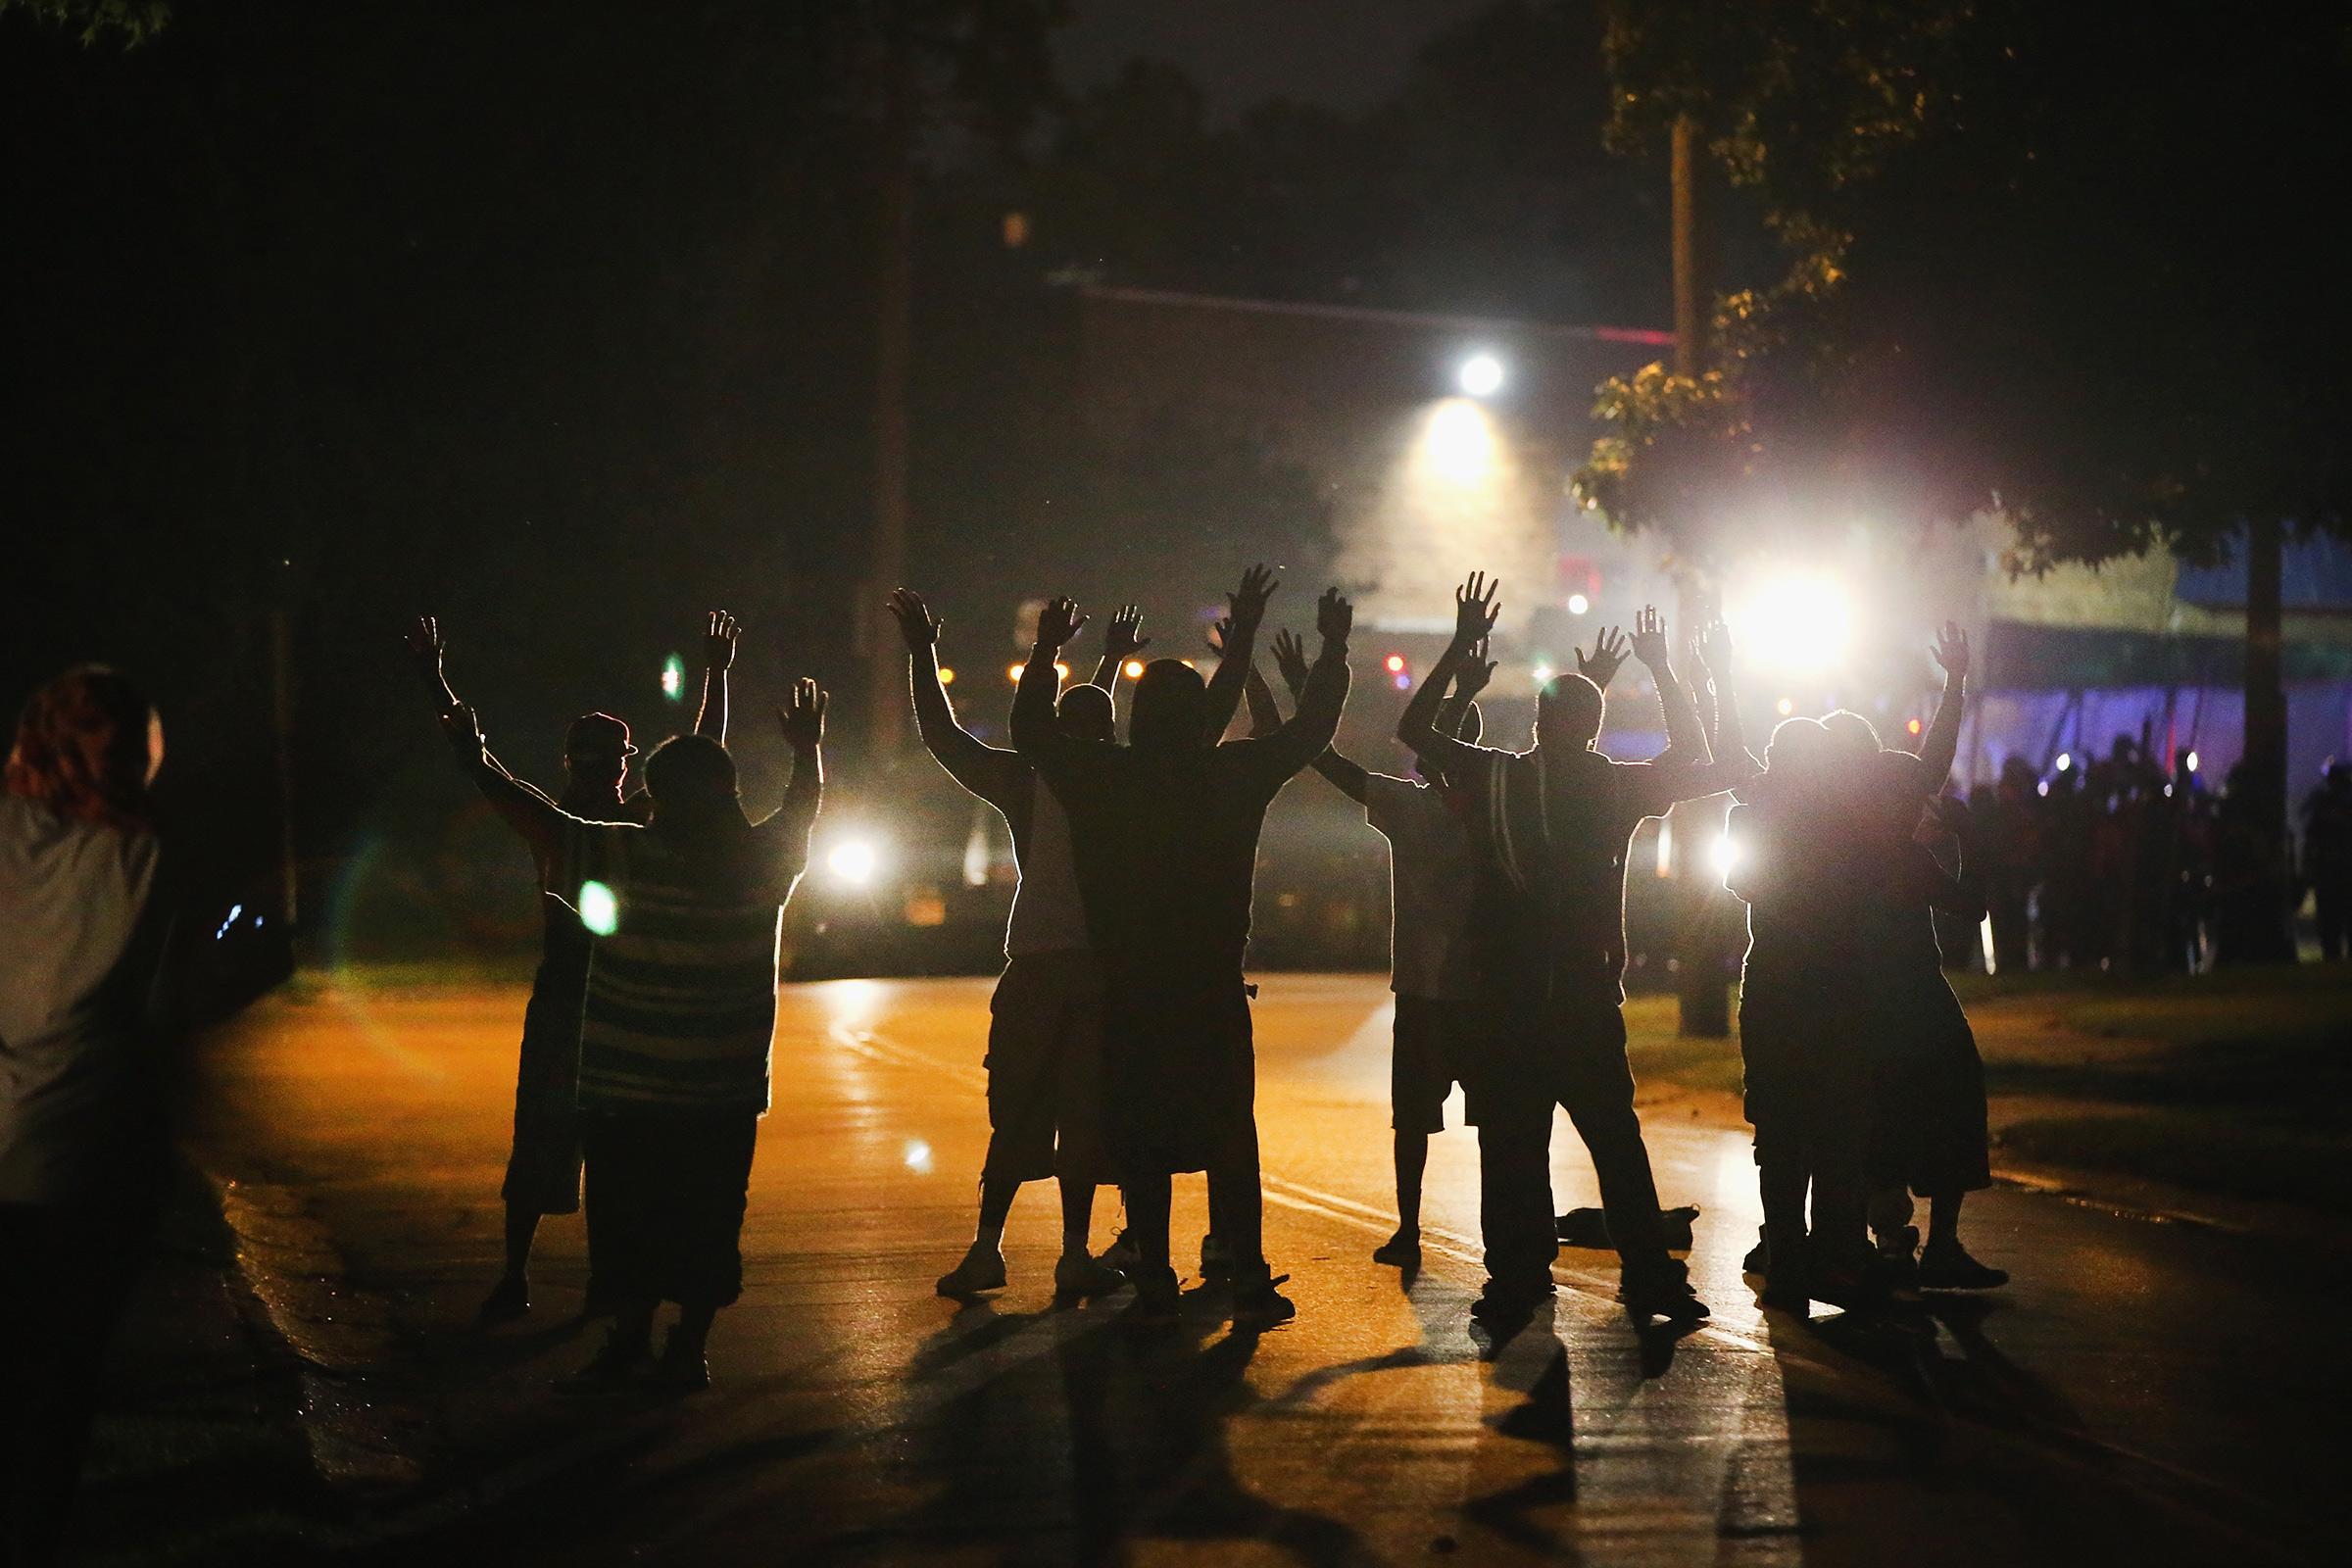 Police lock down a neighborhood in Ferguson amid protests in August 2014. (Scott Olson—Getty Images)